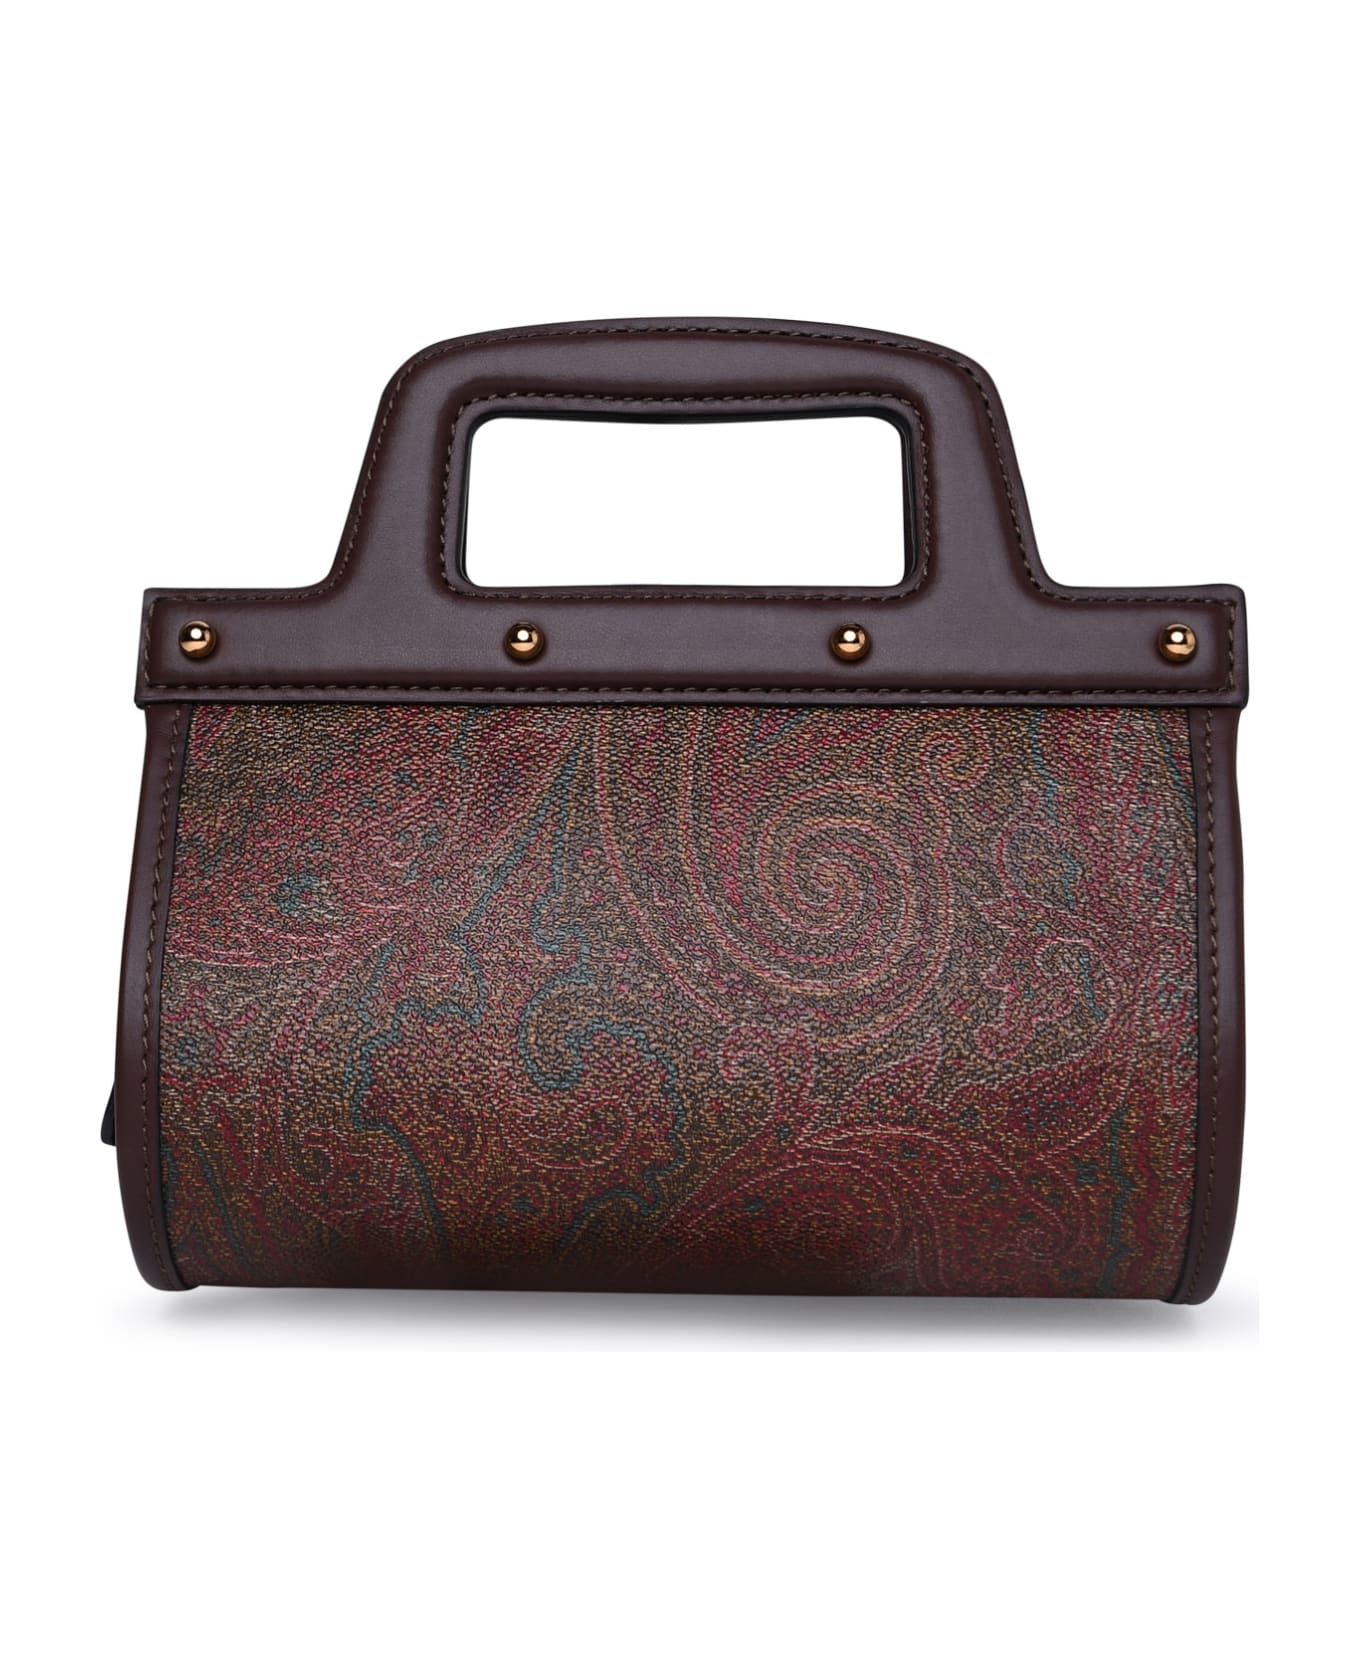 Etro Brown Leather Blend Bag - Marrone